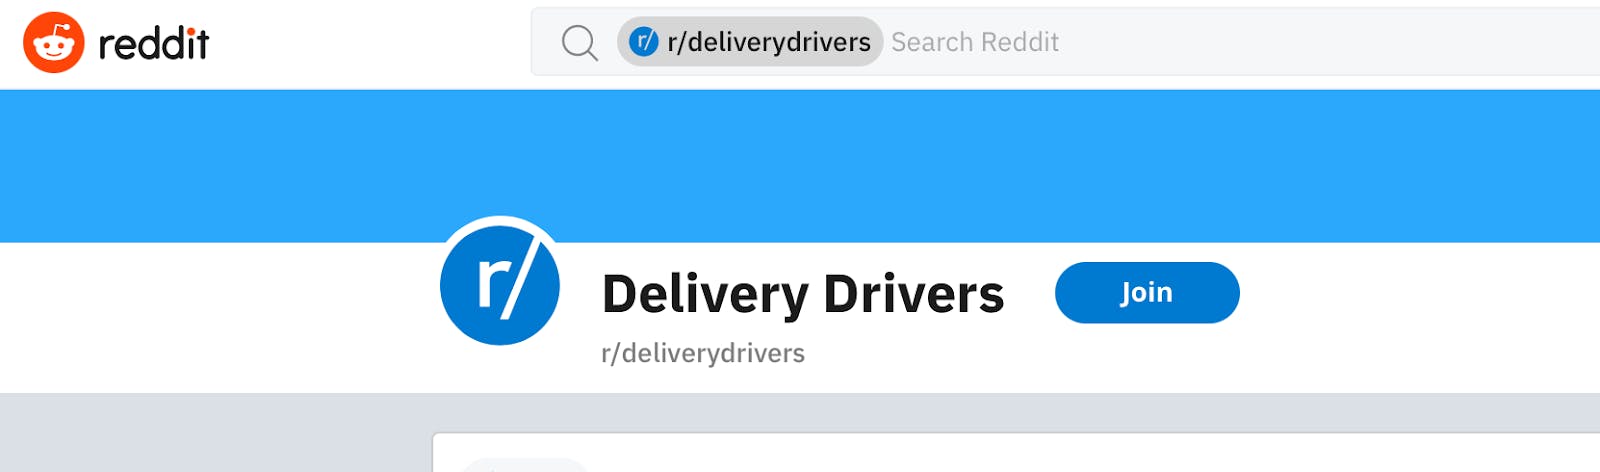 Reddit Delivery Drivers thread